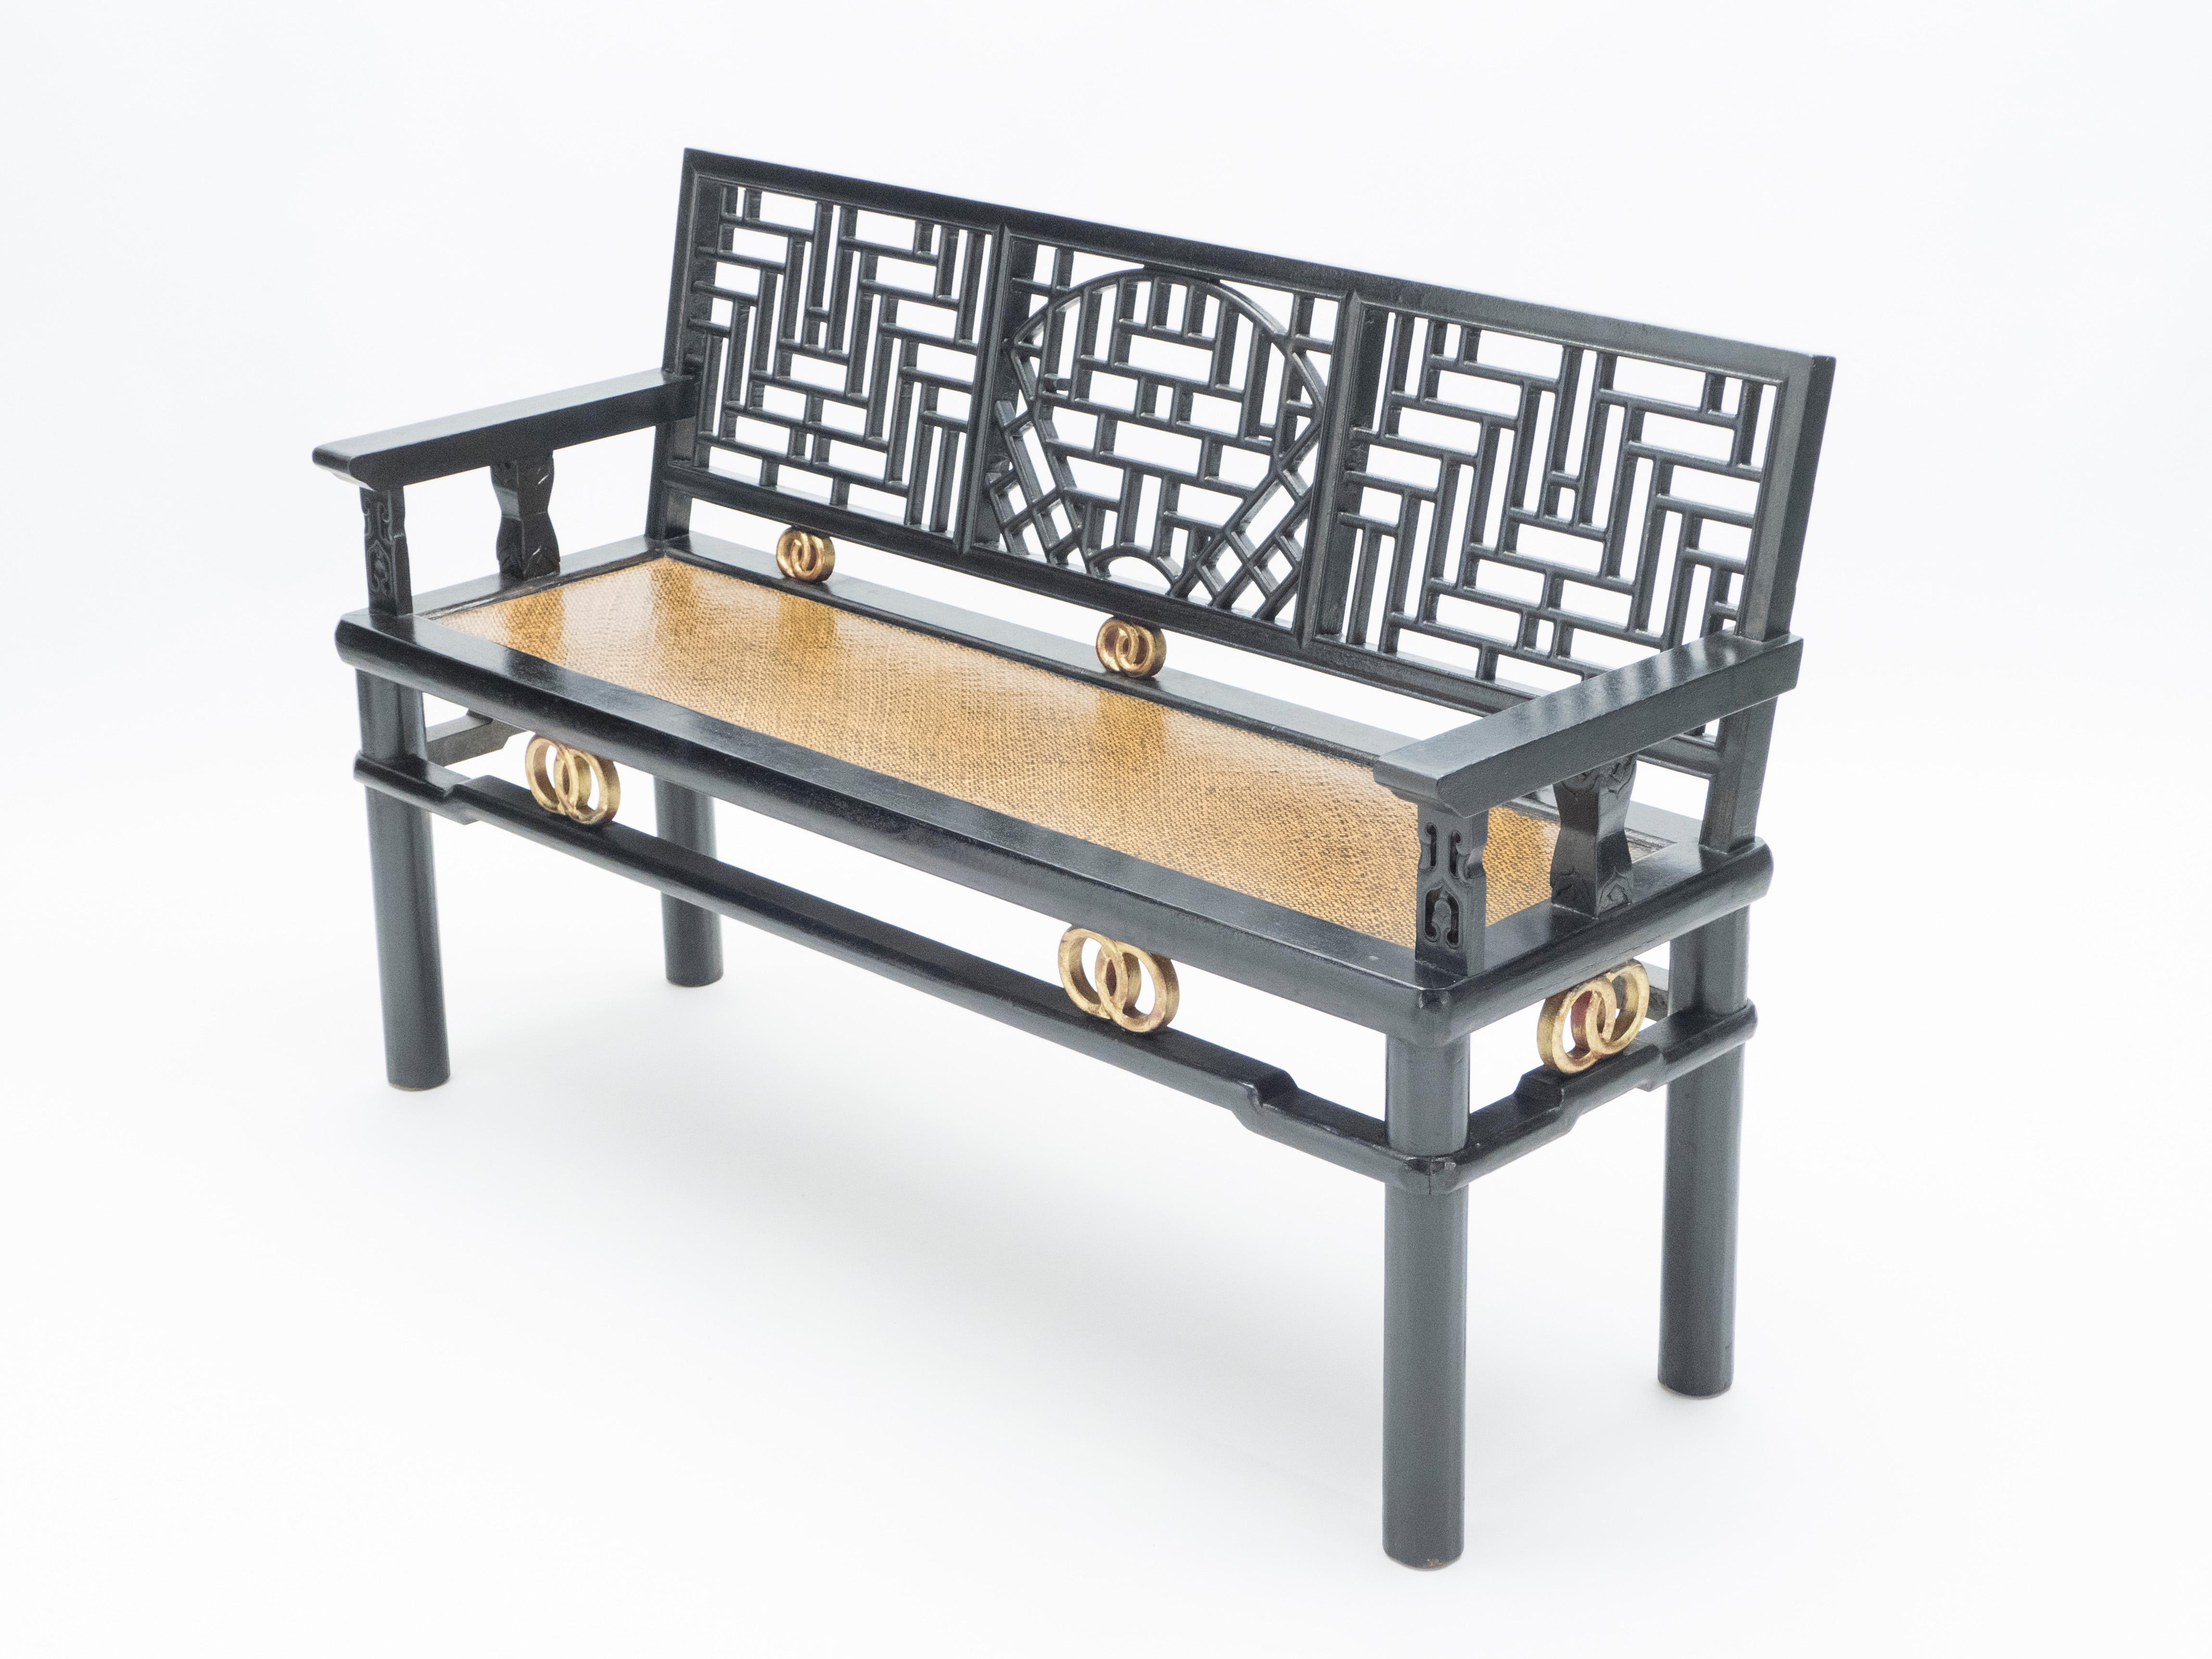 Beautiful early 20th century Chinese bench in black lacquered wood with golden details and woven seat. Geometrical seat back, round legs and very nice patina for this bench gives it a striking presence that works seamlessly into any interior, but